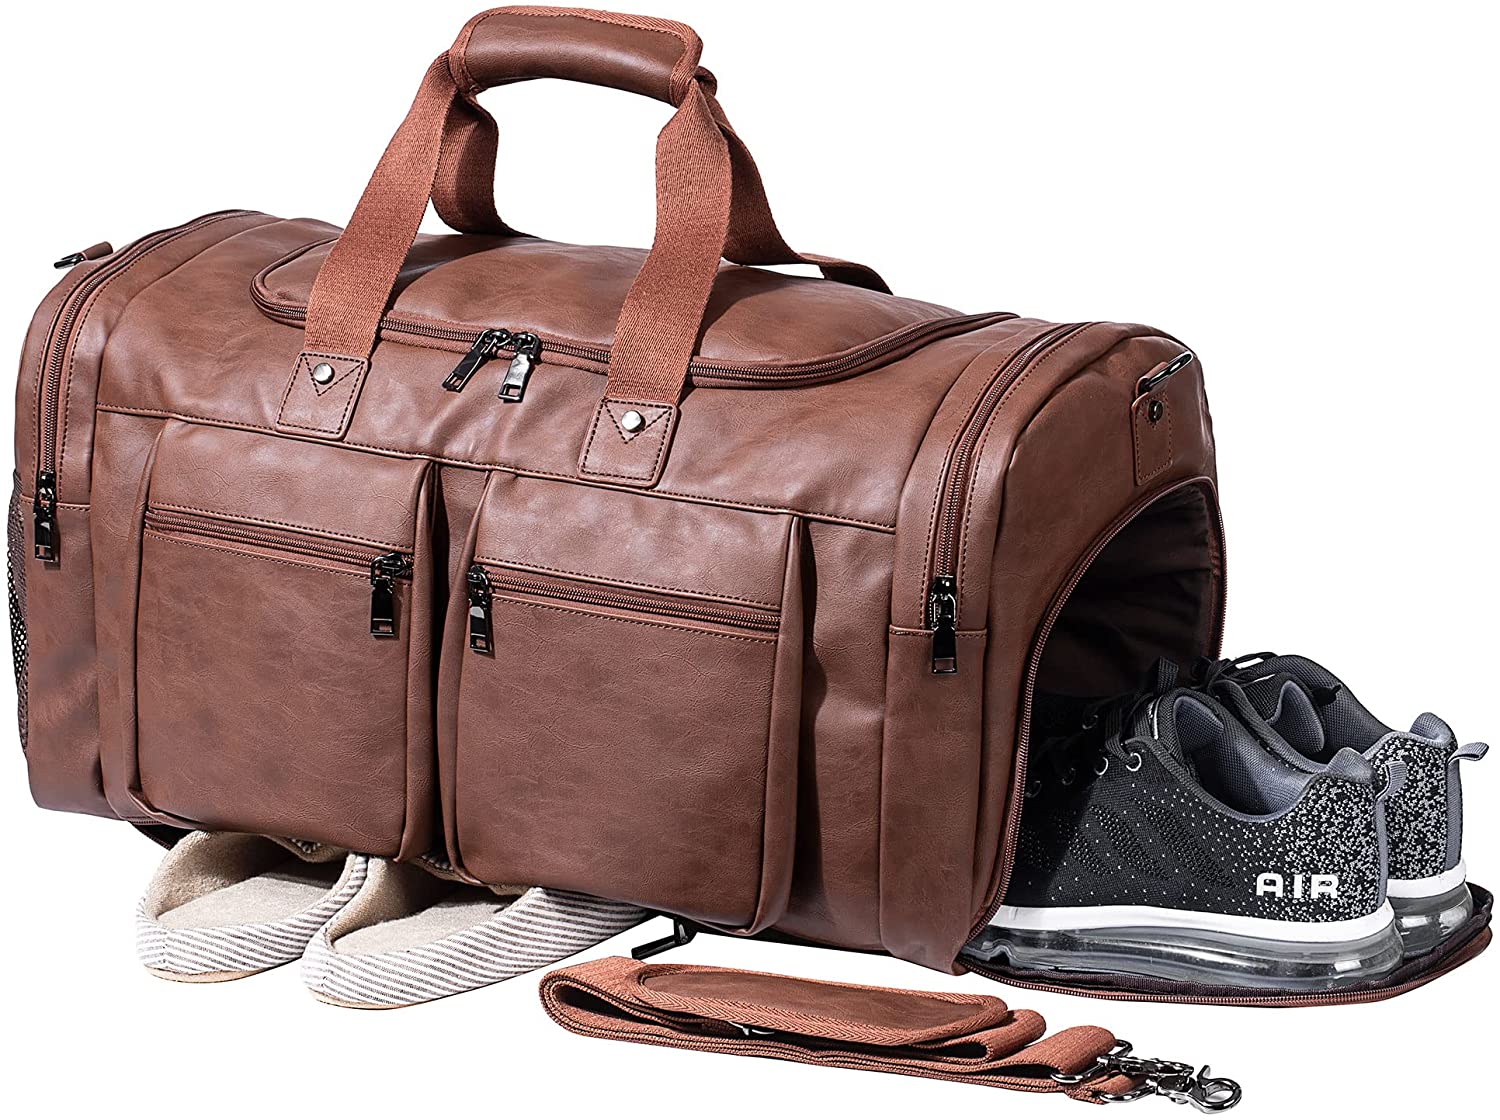 STORITE Pu Leather Bag Organizer - Brown Duffel Without Wheels